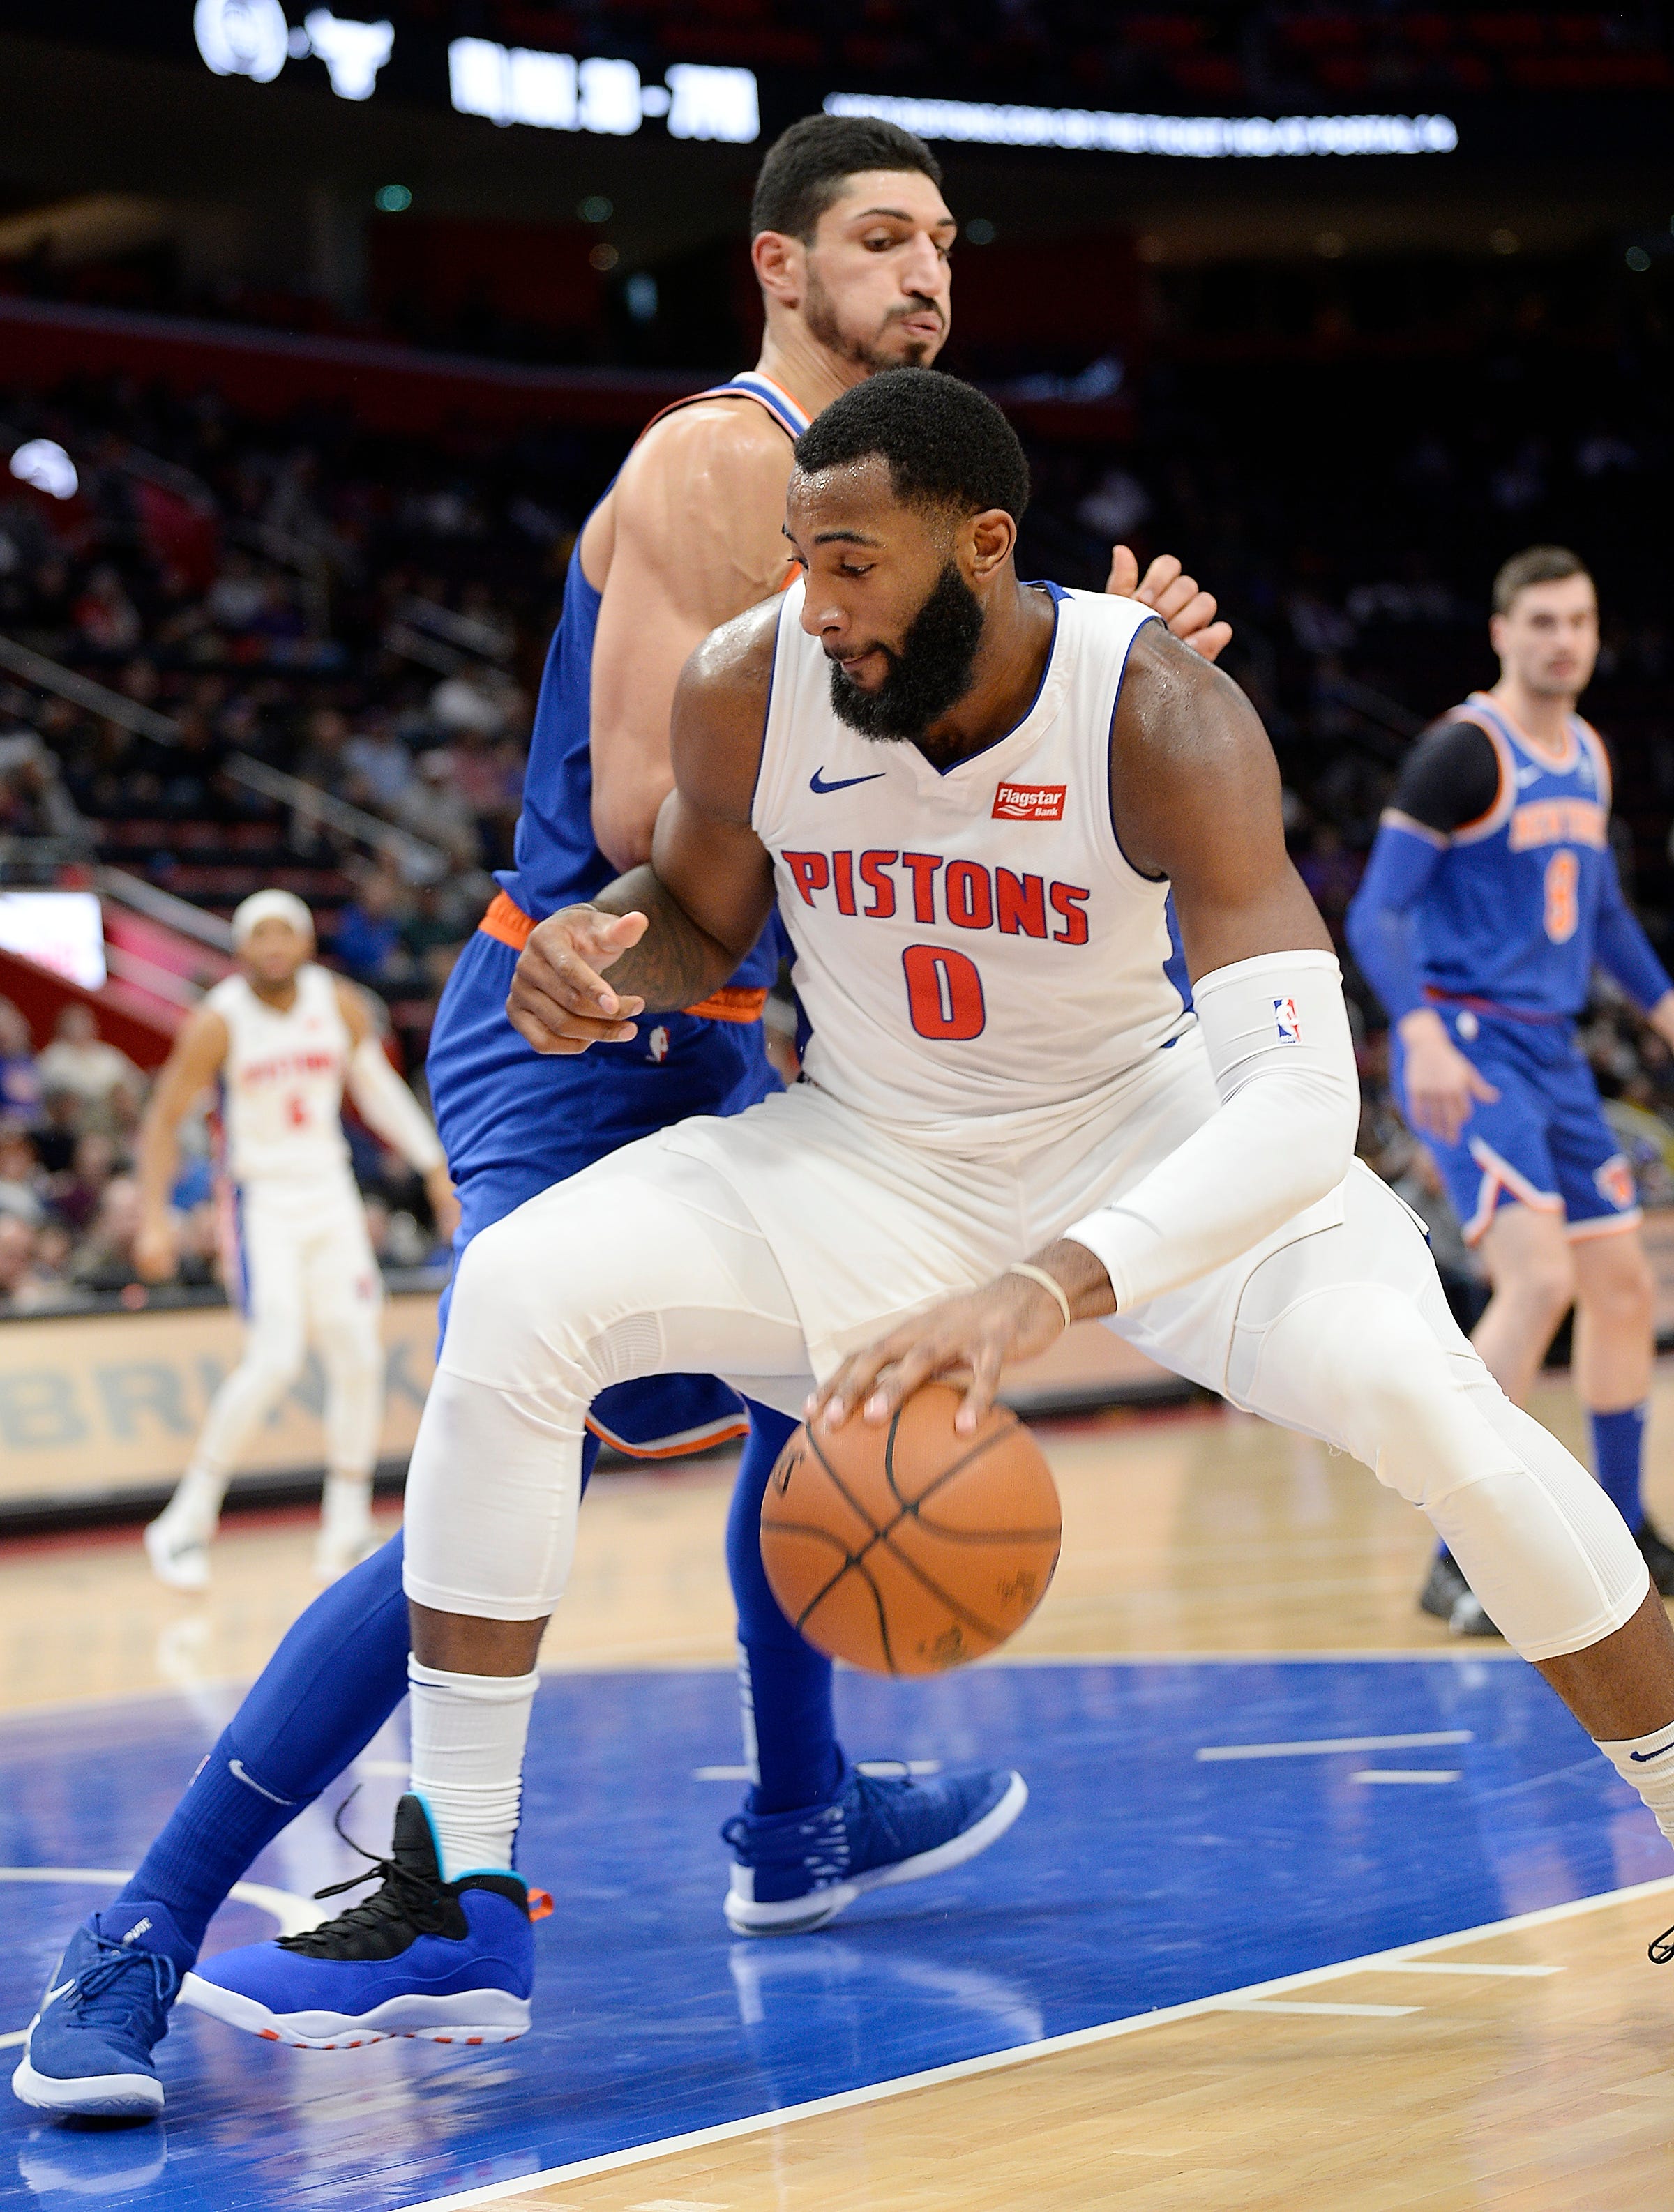 Pistons' Andre Drummond drives around Knicks' Enes Kanter in the second quarter.